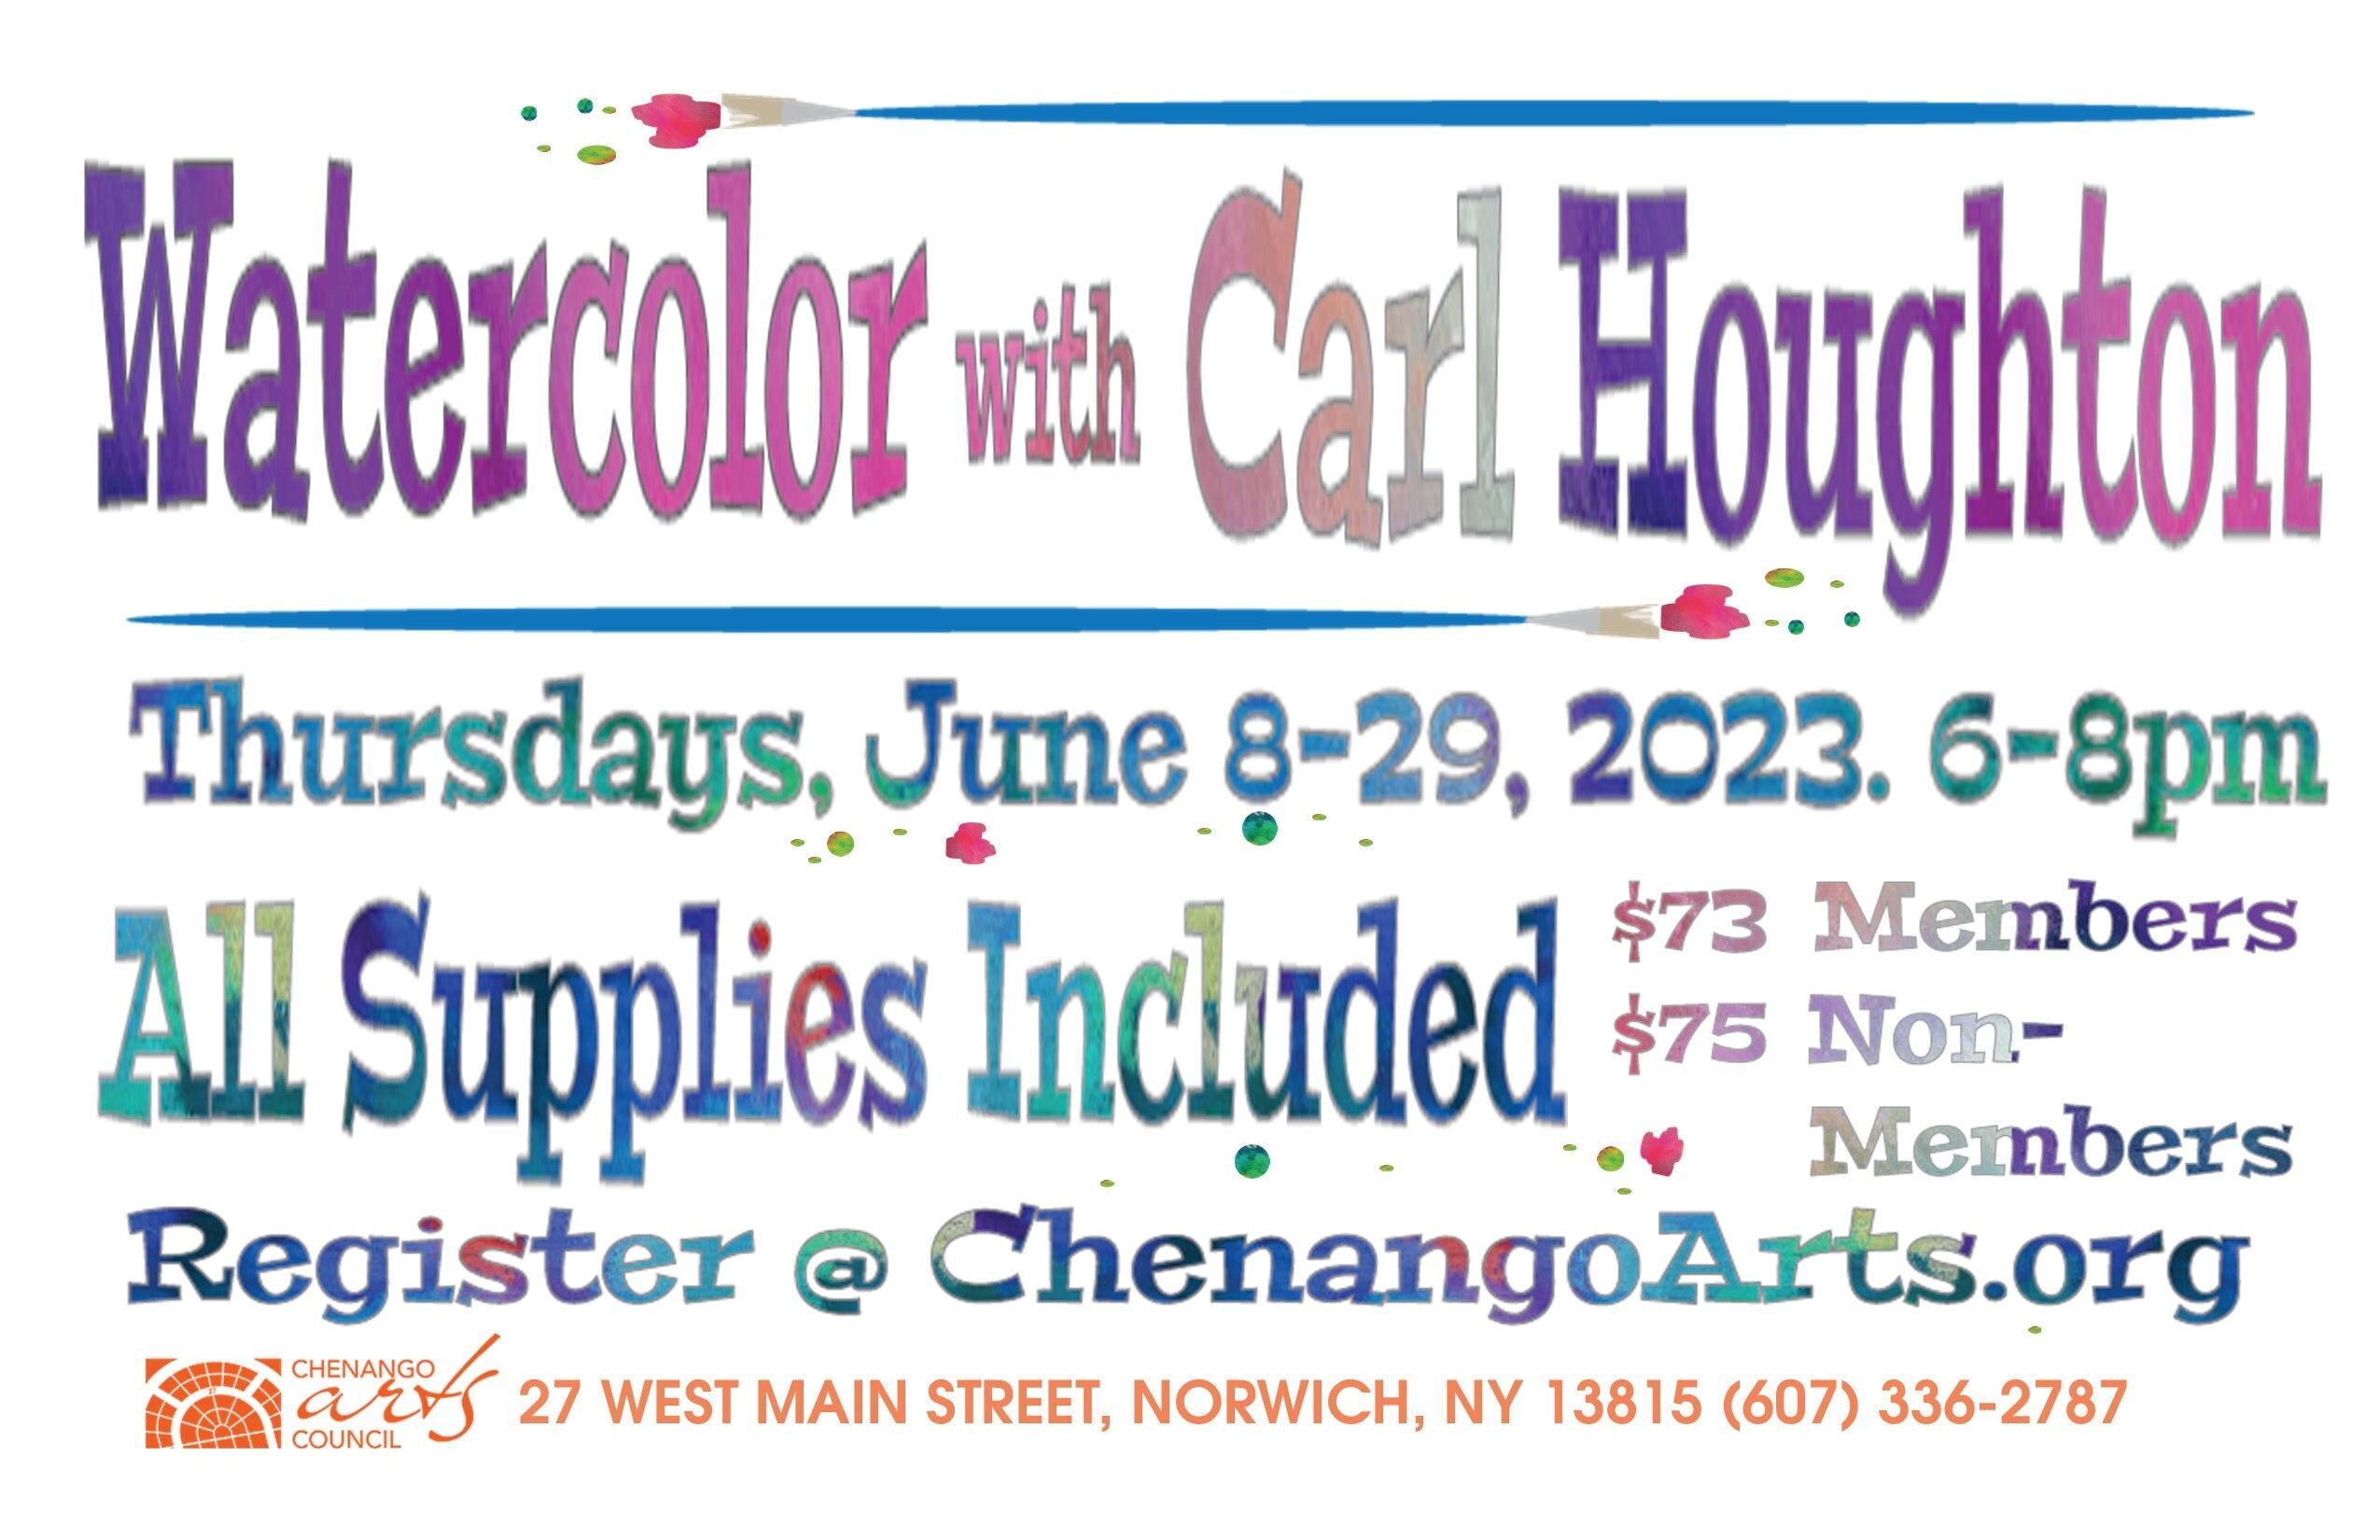 Watercolor with Carl Houghton